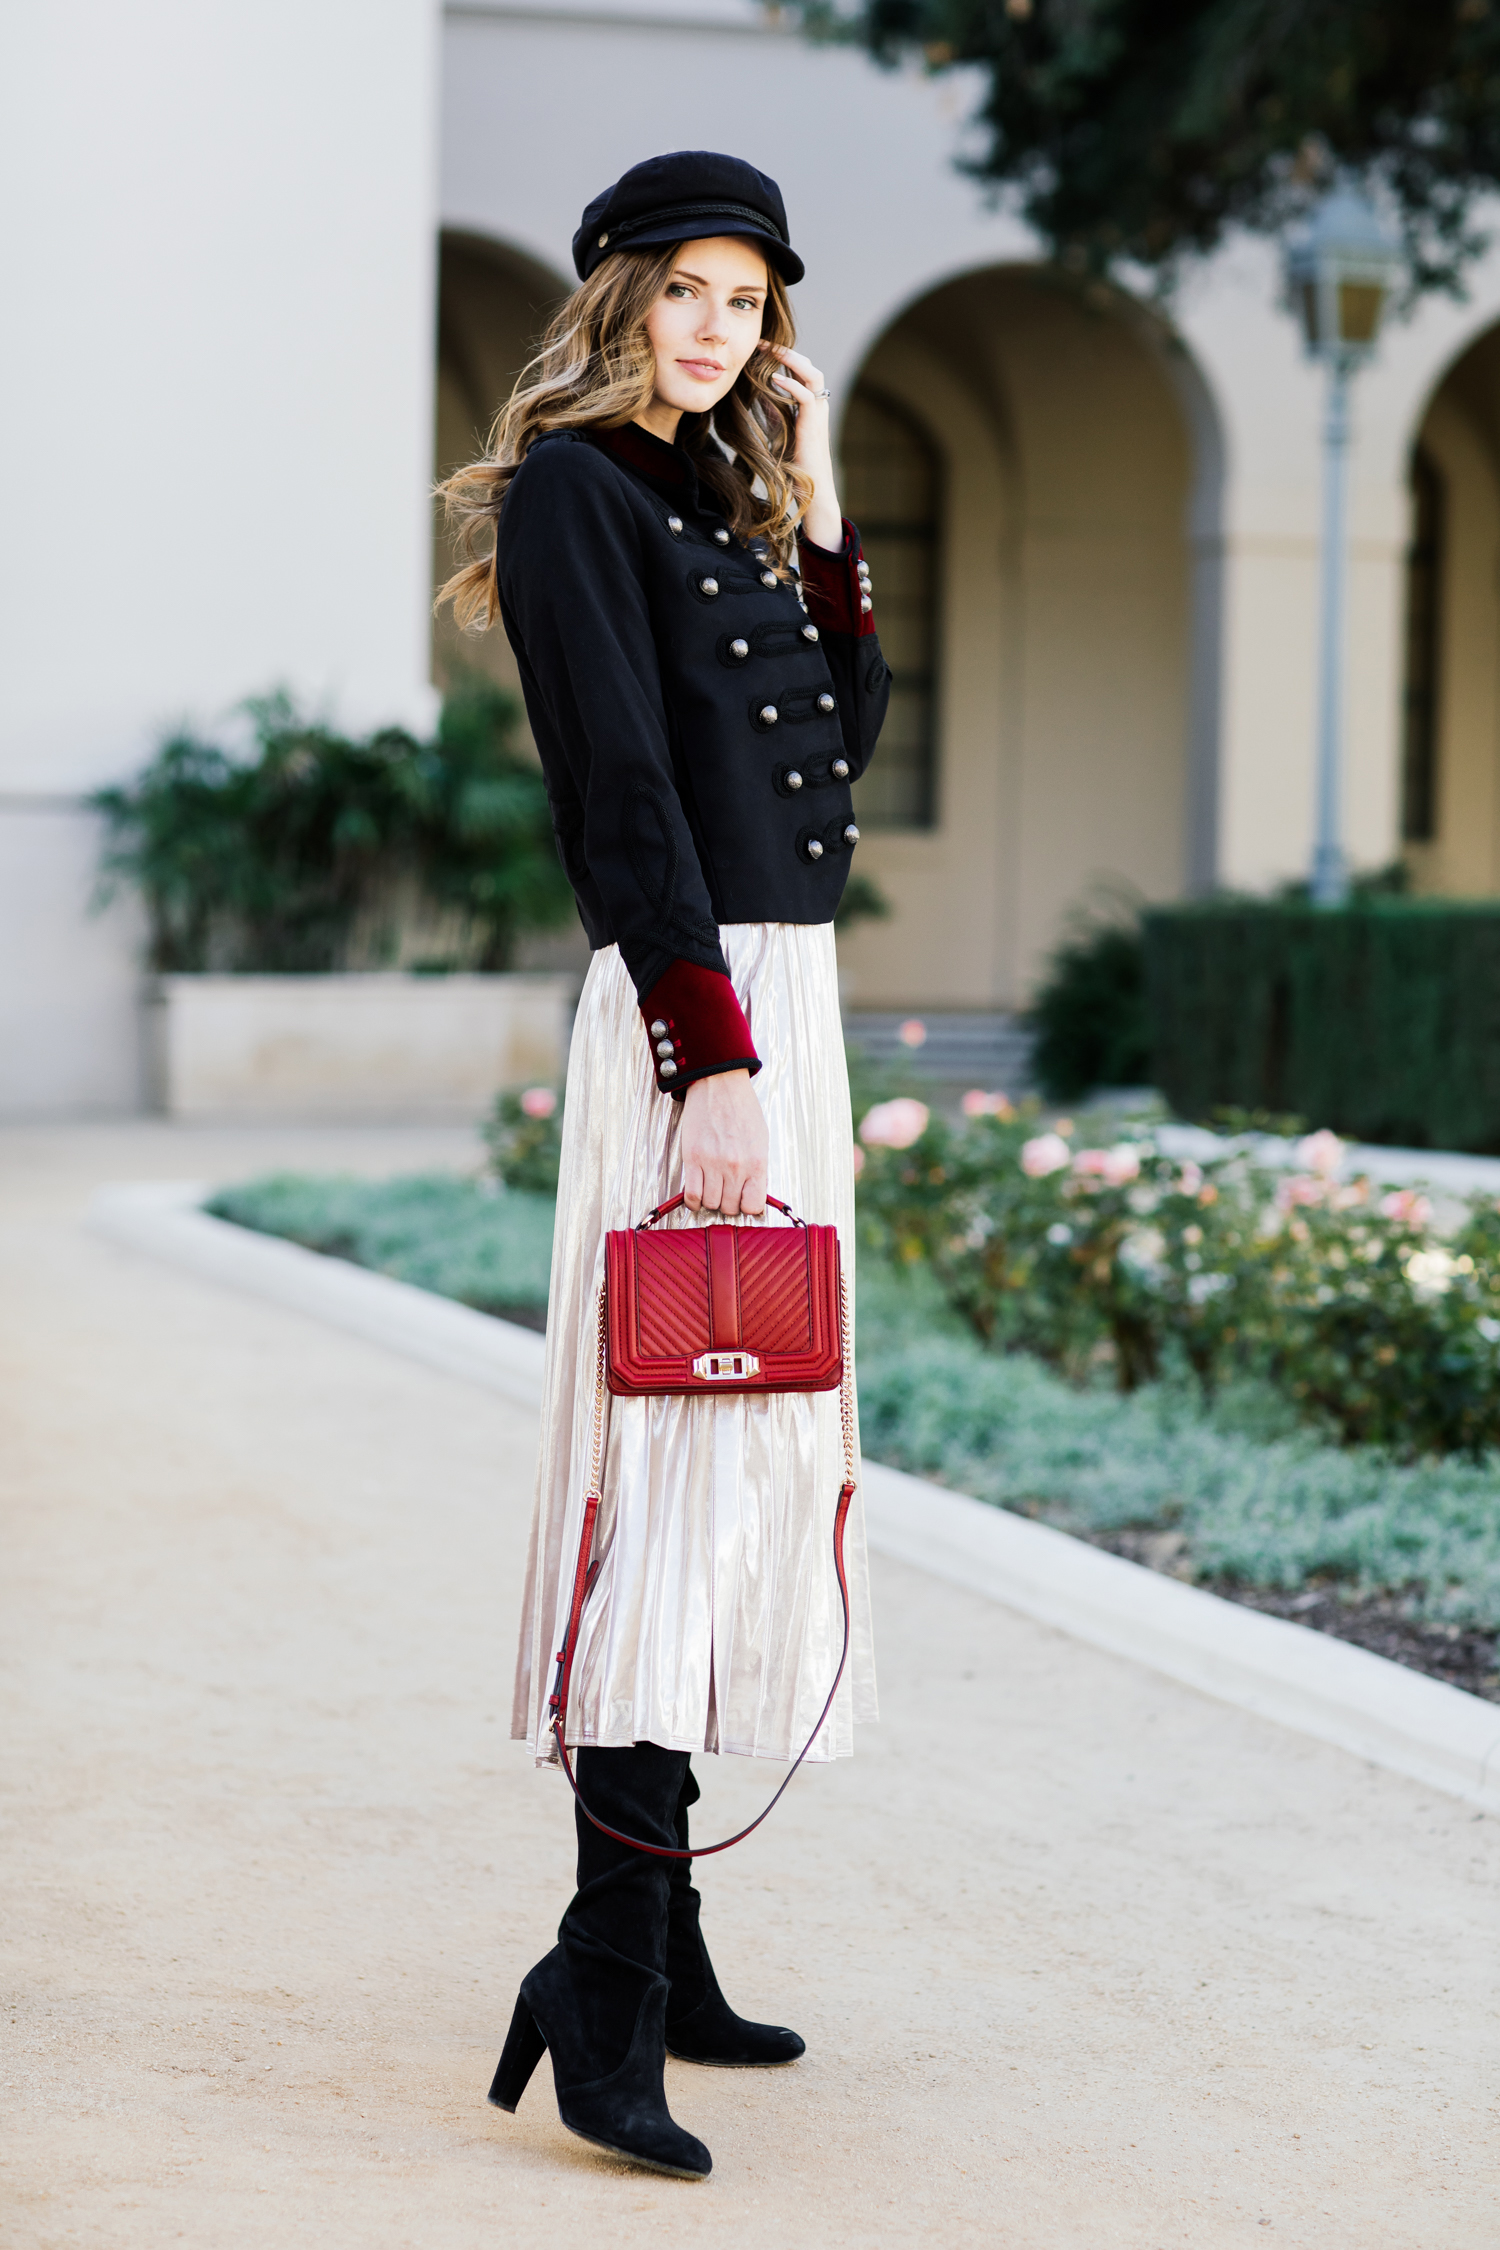 Alyssa Campanella of The A List blog wearing The Kooples military jacket and 1. State pleated skirt